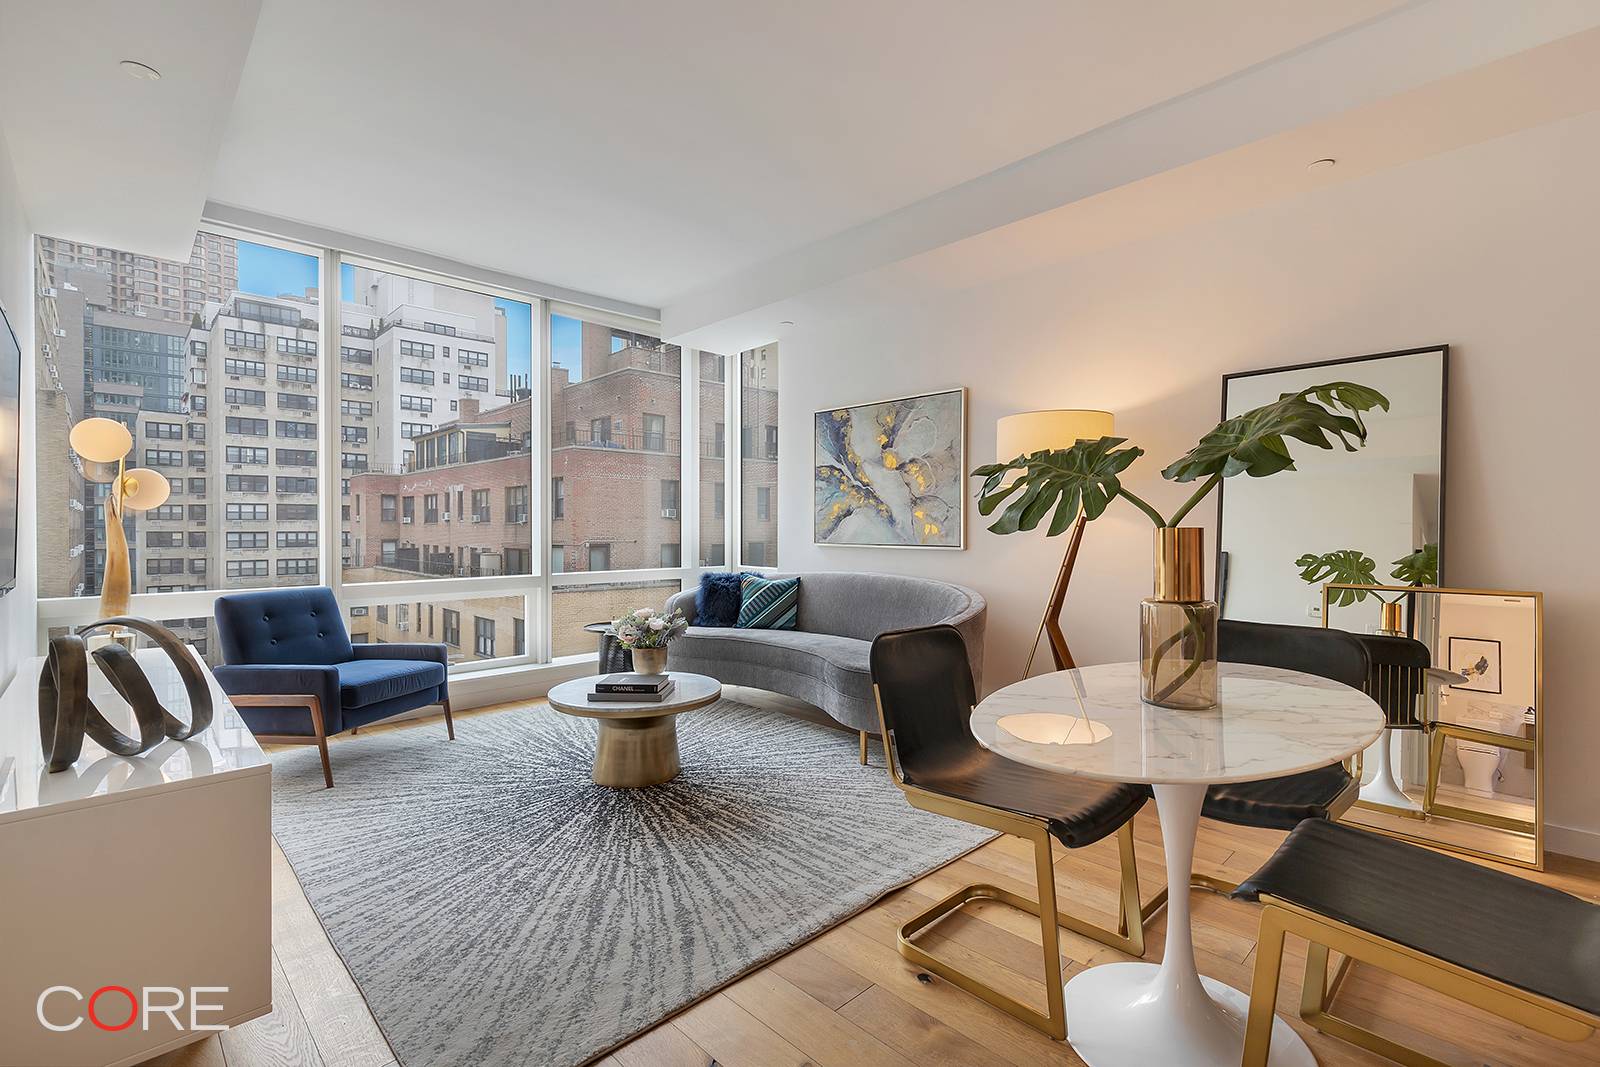 Welcome to this gorgeous and modern one bedroom, one bath apartment, featuring tall ceilings and floor to ceiling windows with eastern and southern exposures.